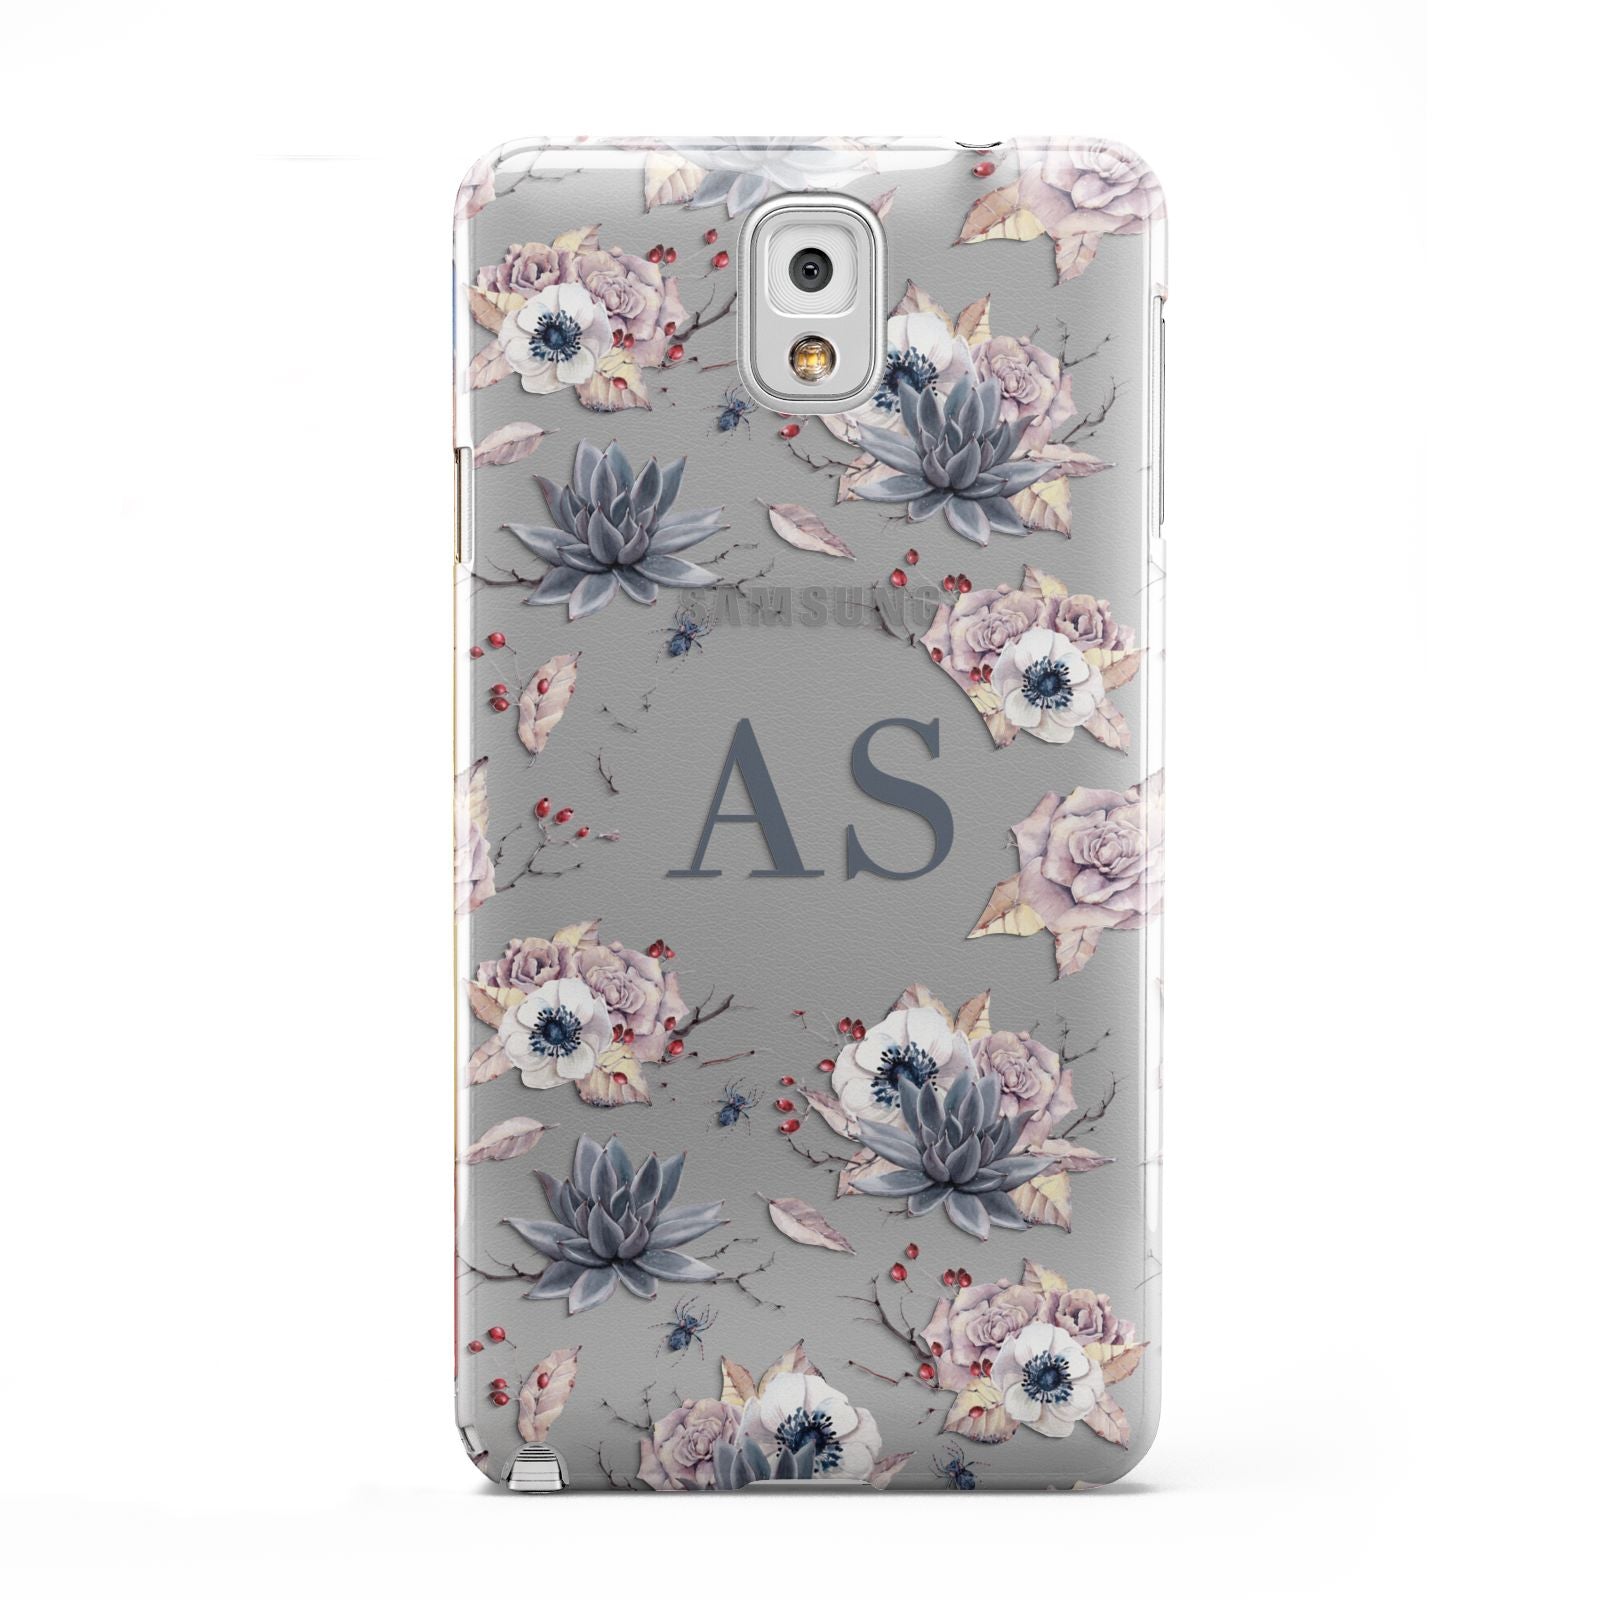 Personalised Halloween Floral Samsung Galaxy Note 3 Case